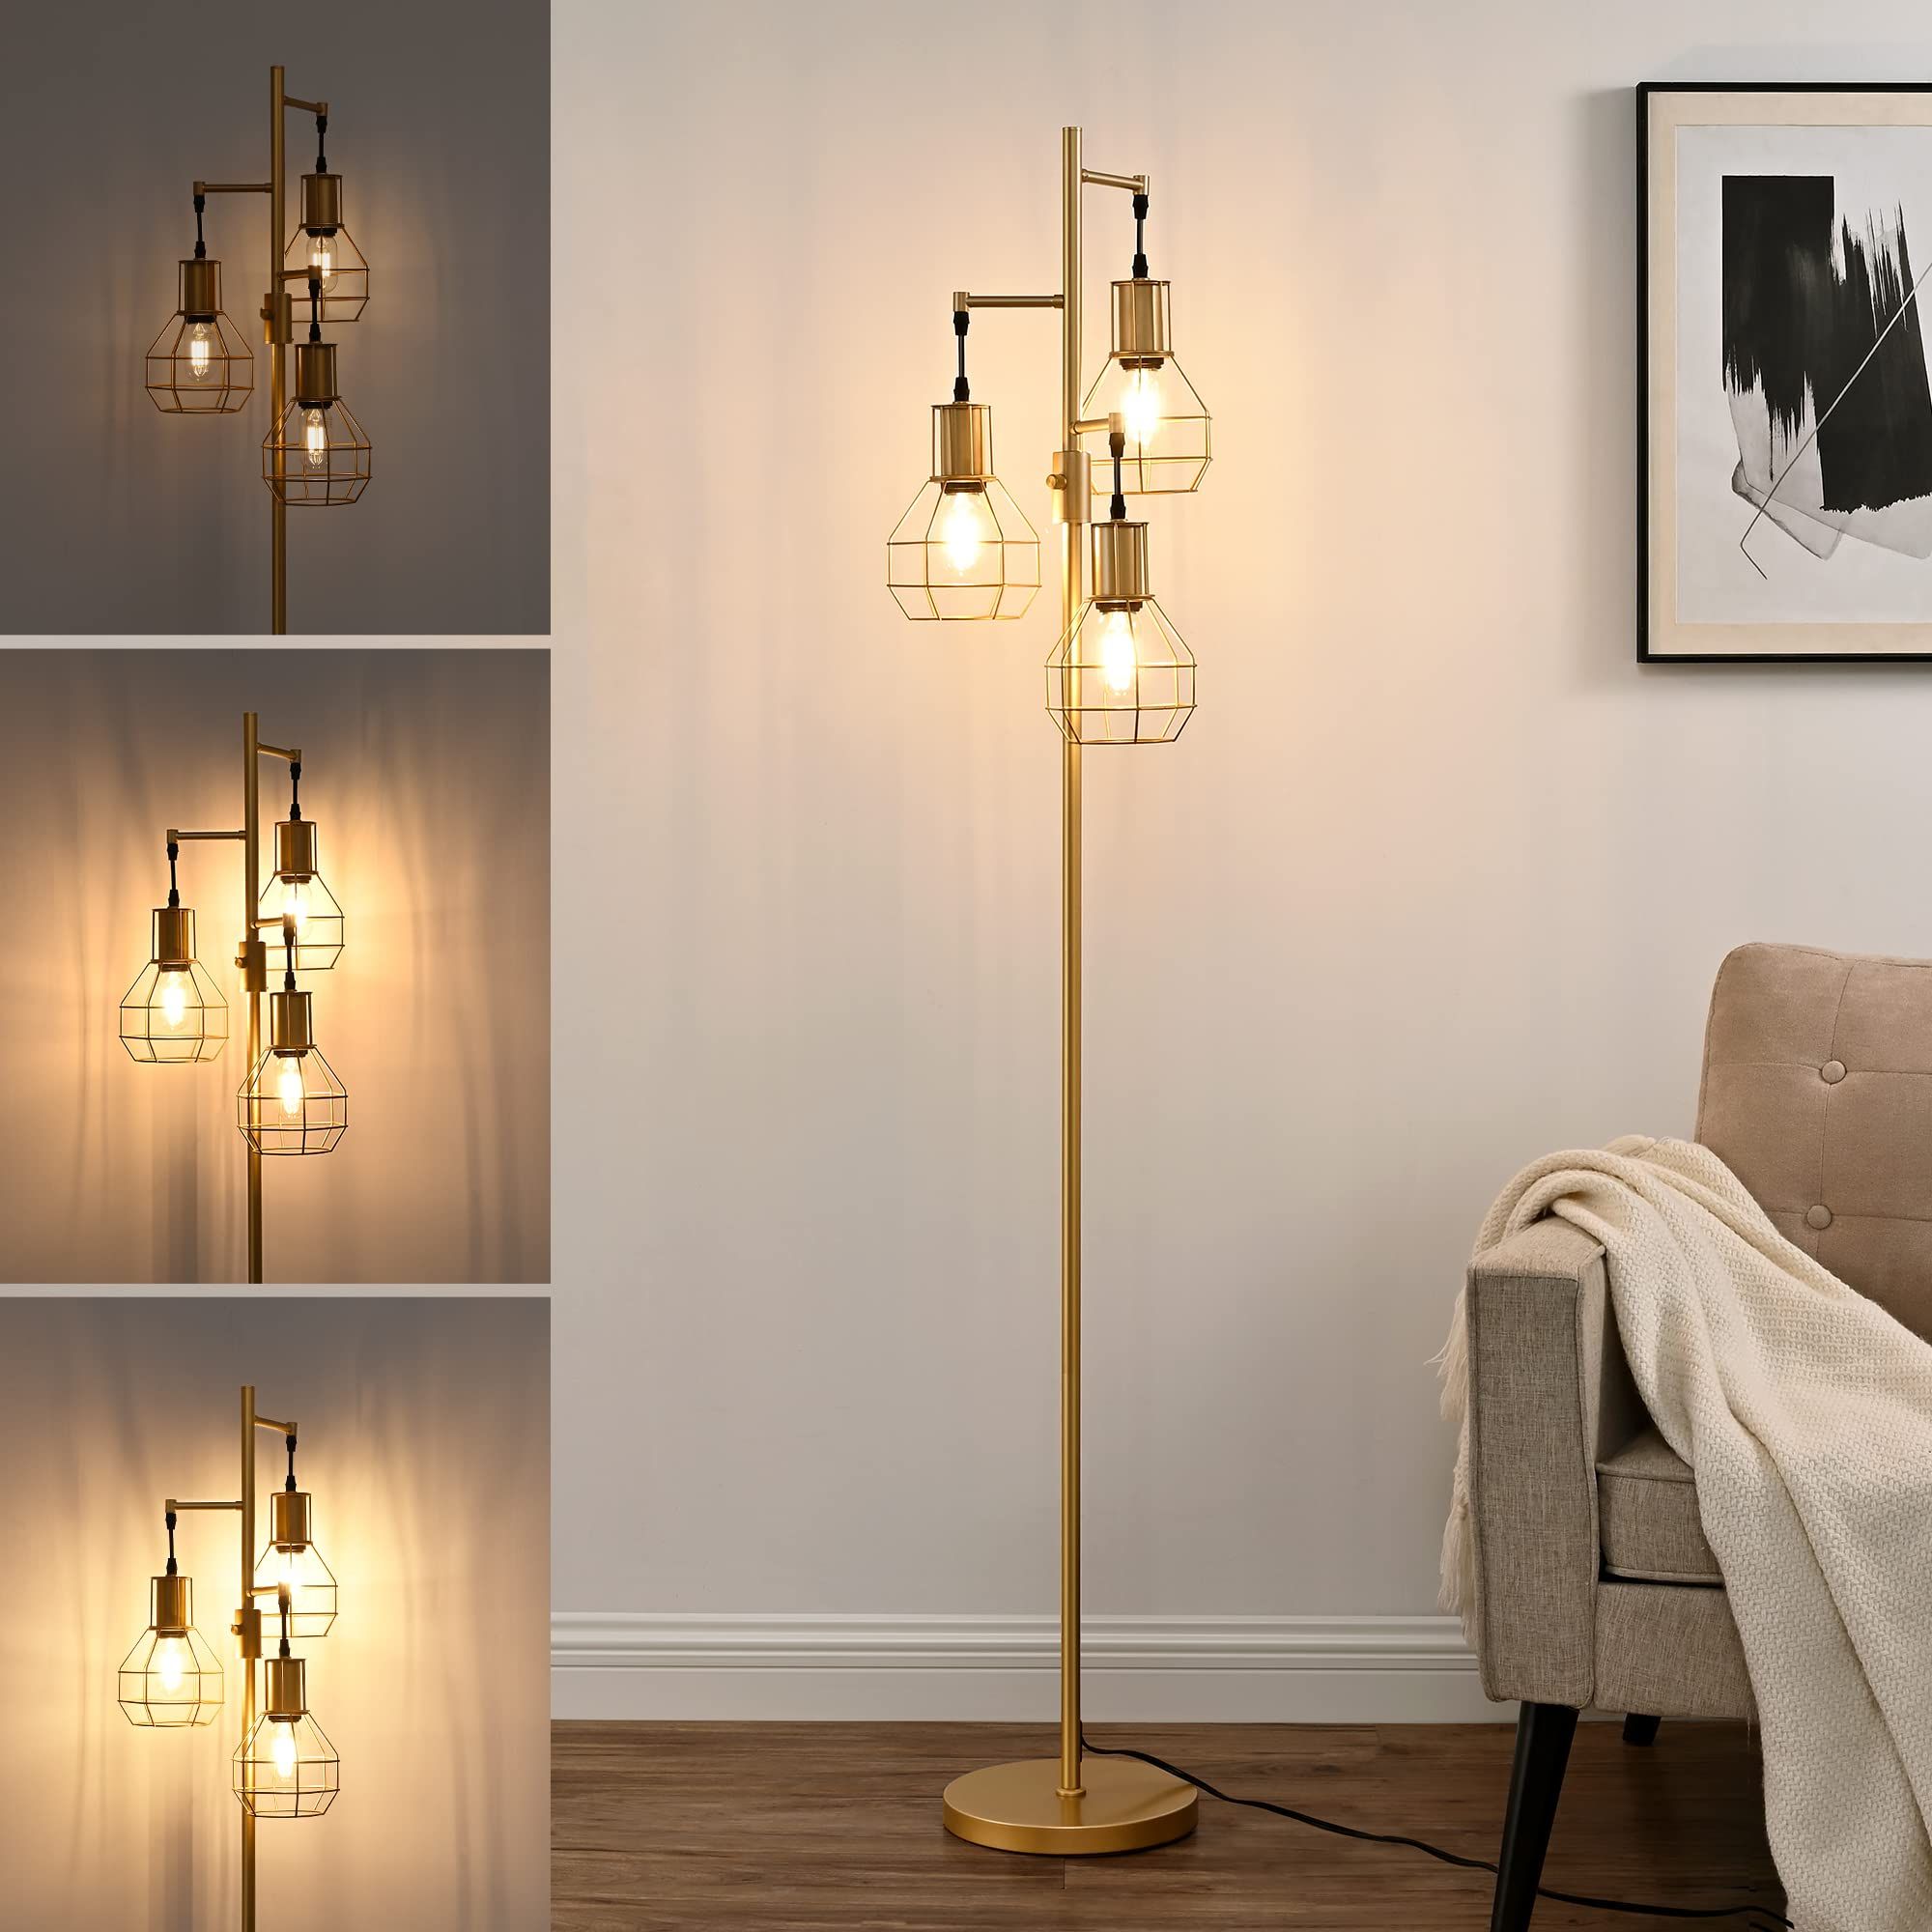 Gold Standing Lamps With Well Known Amazon: Edishine Gold Floor Lamp For Living Room, Farmhouse Dimmable Floor  Lamps With 3 Led Edison Bulbs, Modern Tall Standing Corner Lamp With  Elegant Metal Heads For Bedroom, Office, Industrial Home Decor : (View 6 of 10)